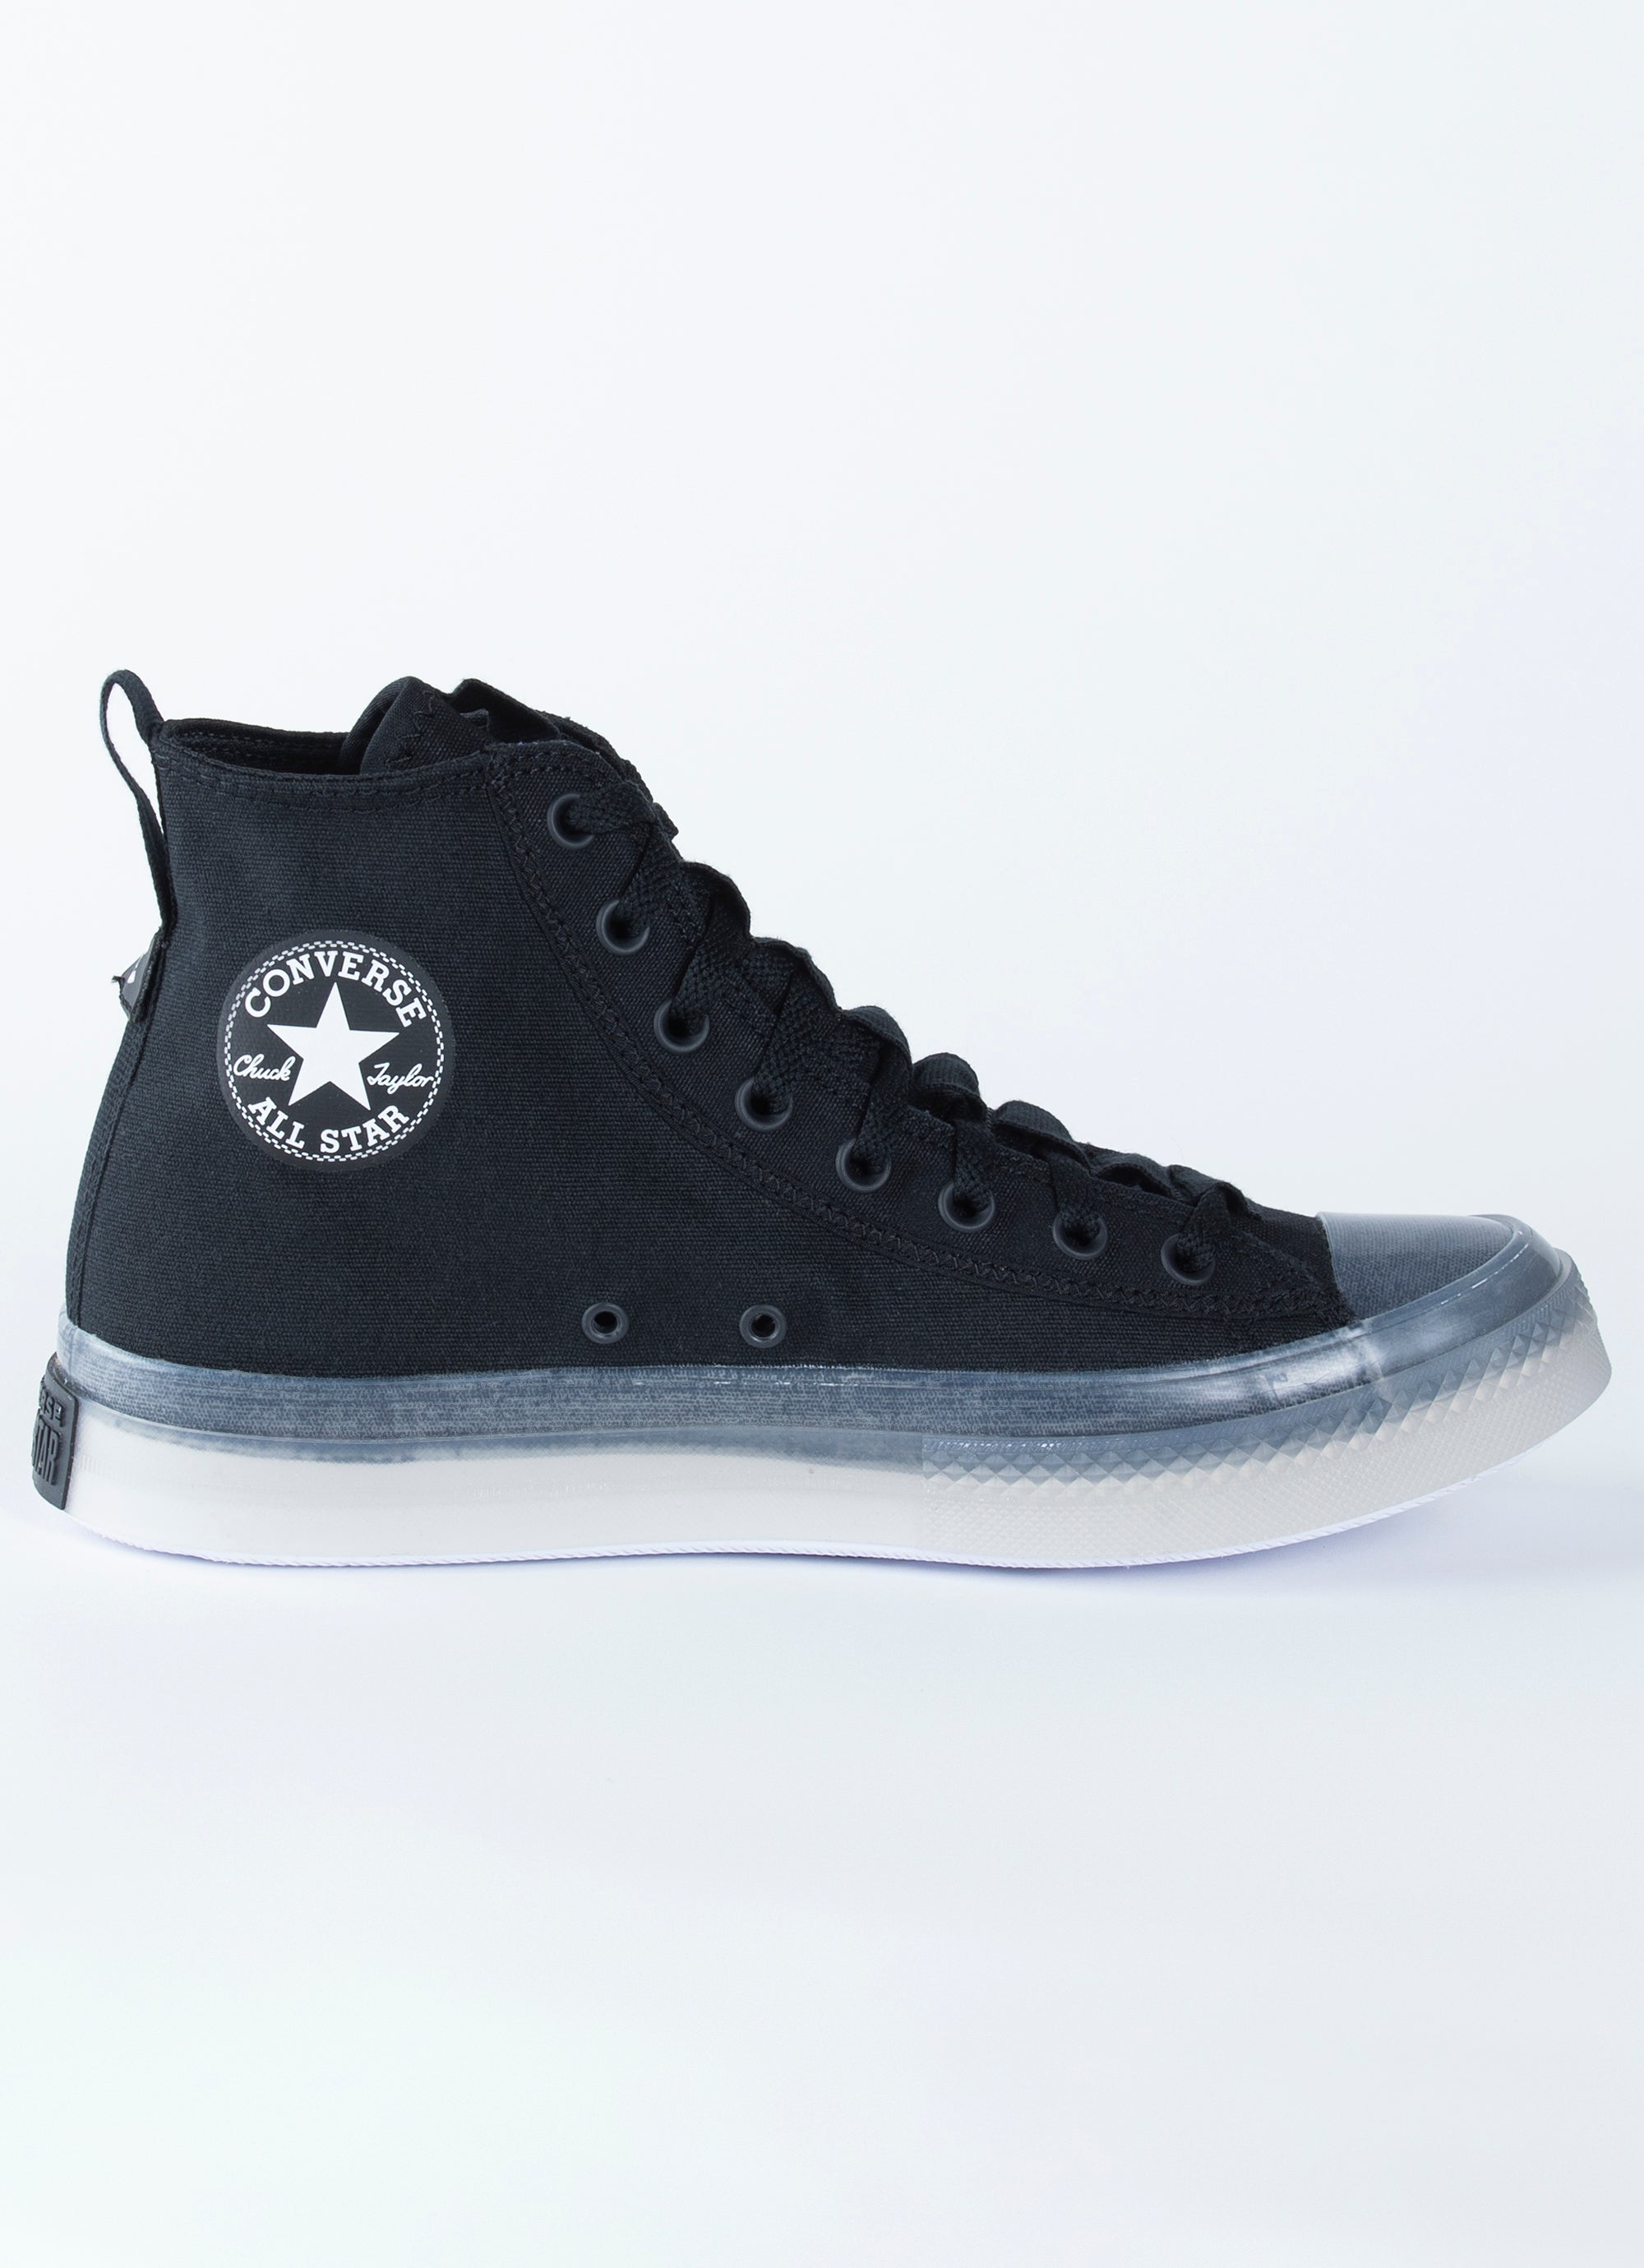 Converse Chuck Taylor All Star Cx Explore High Shoe in Black | Red Rat